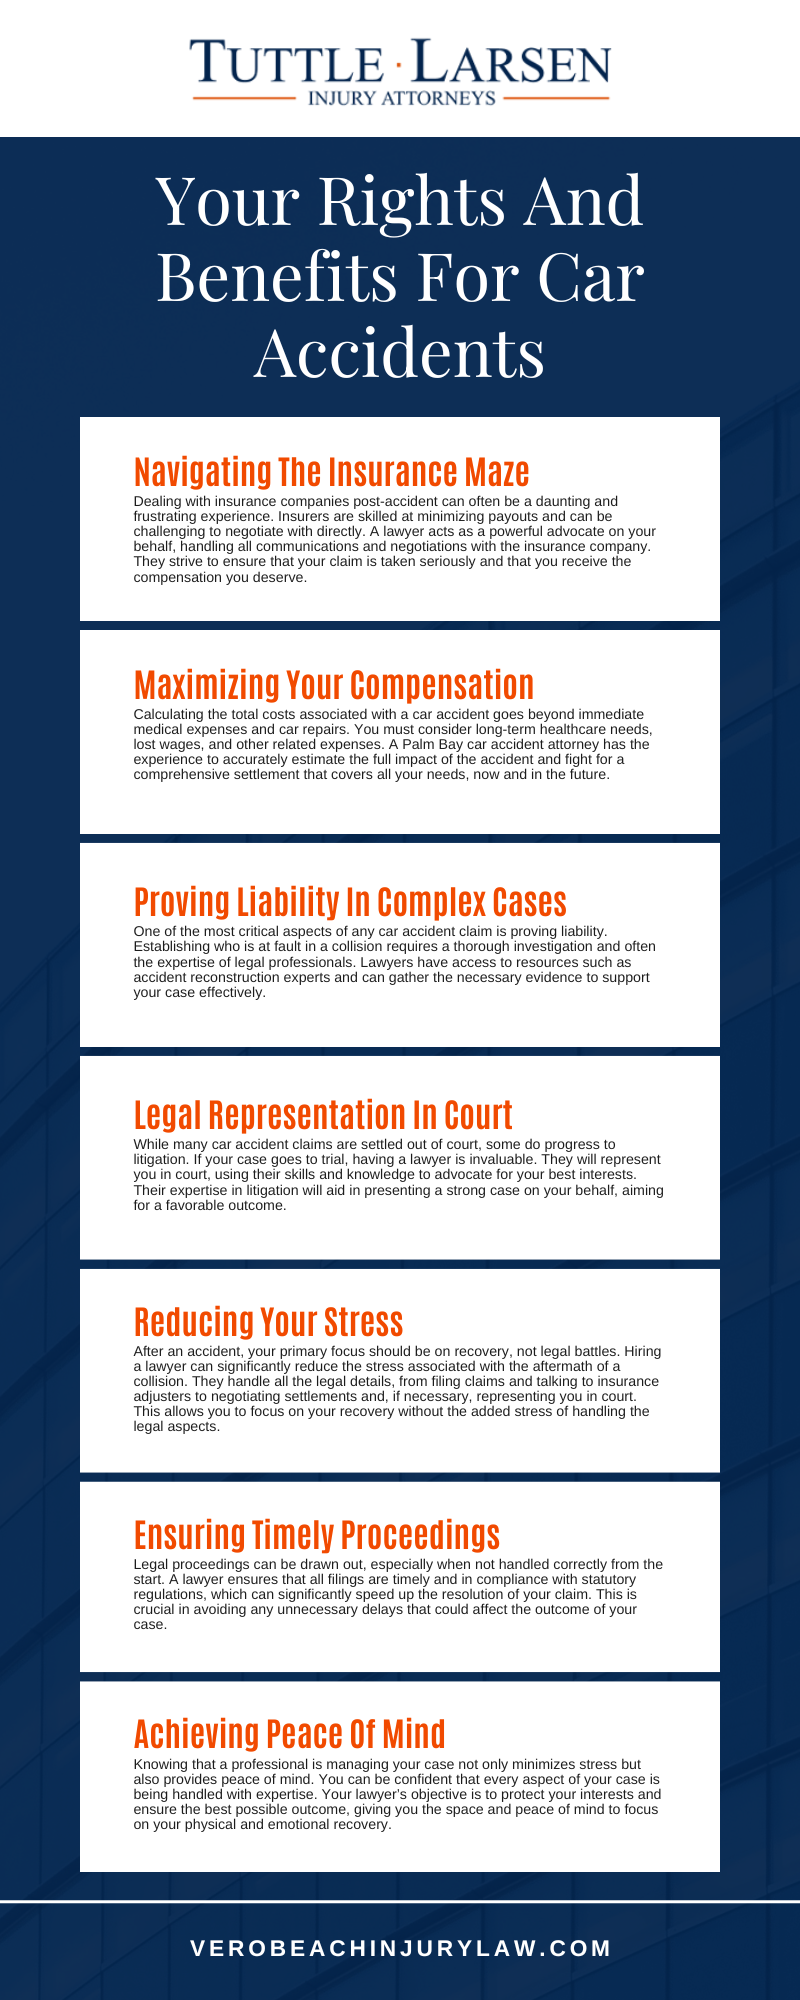 Your Rights And Benefits For Car Accidents Infographic